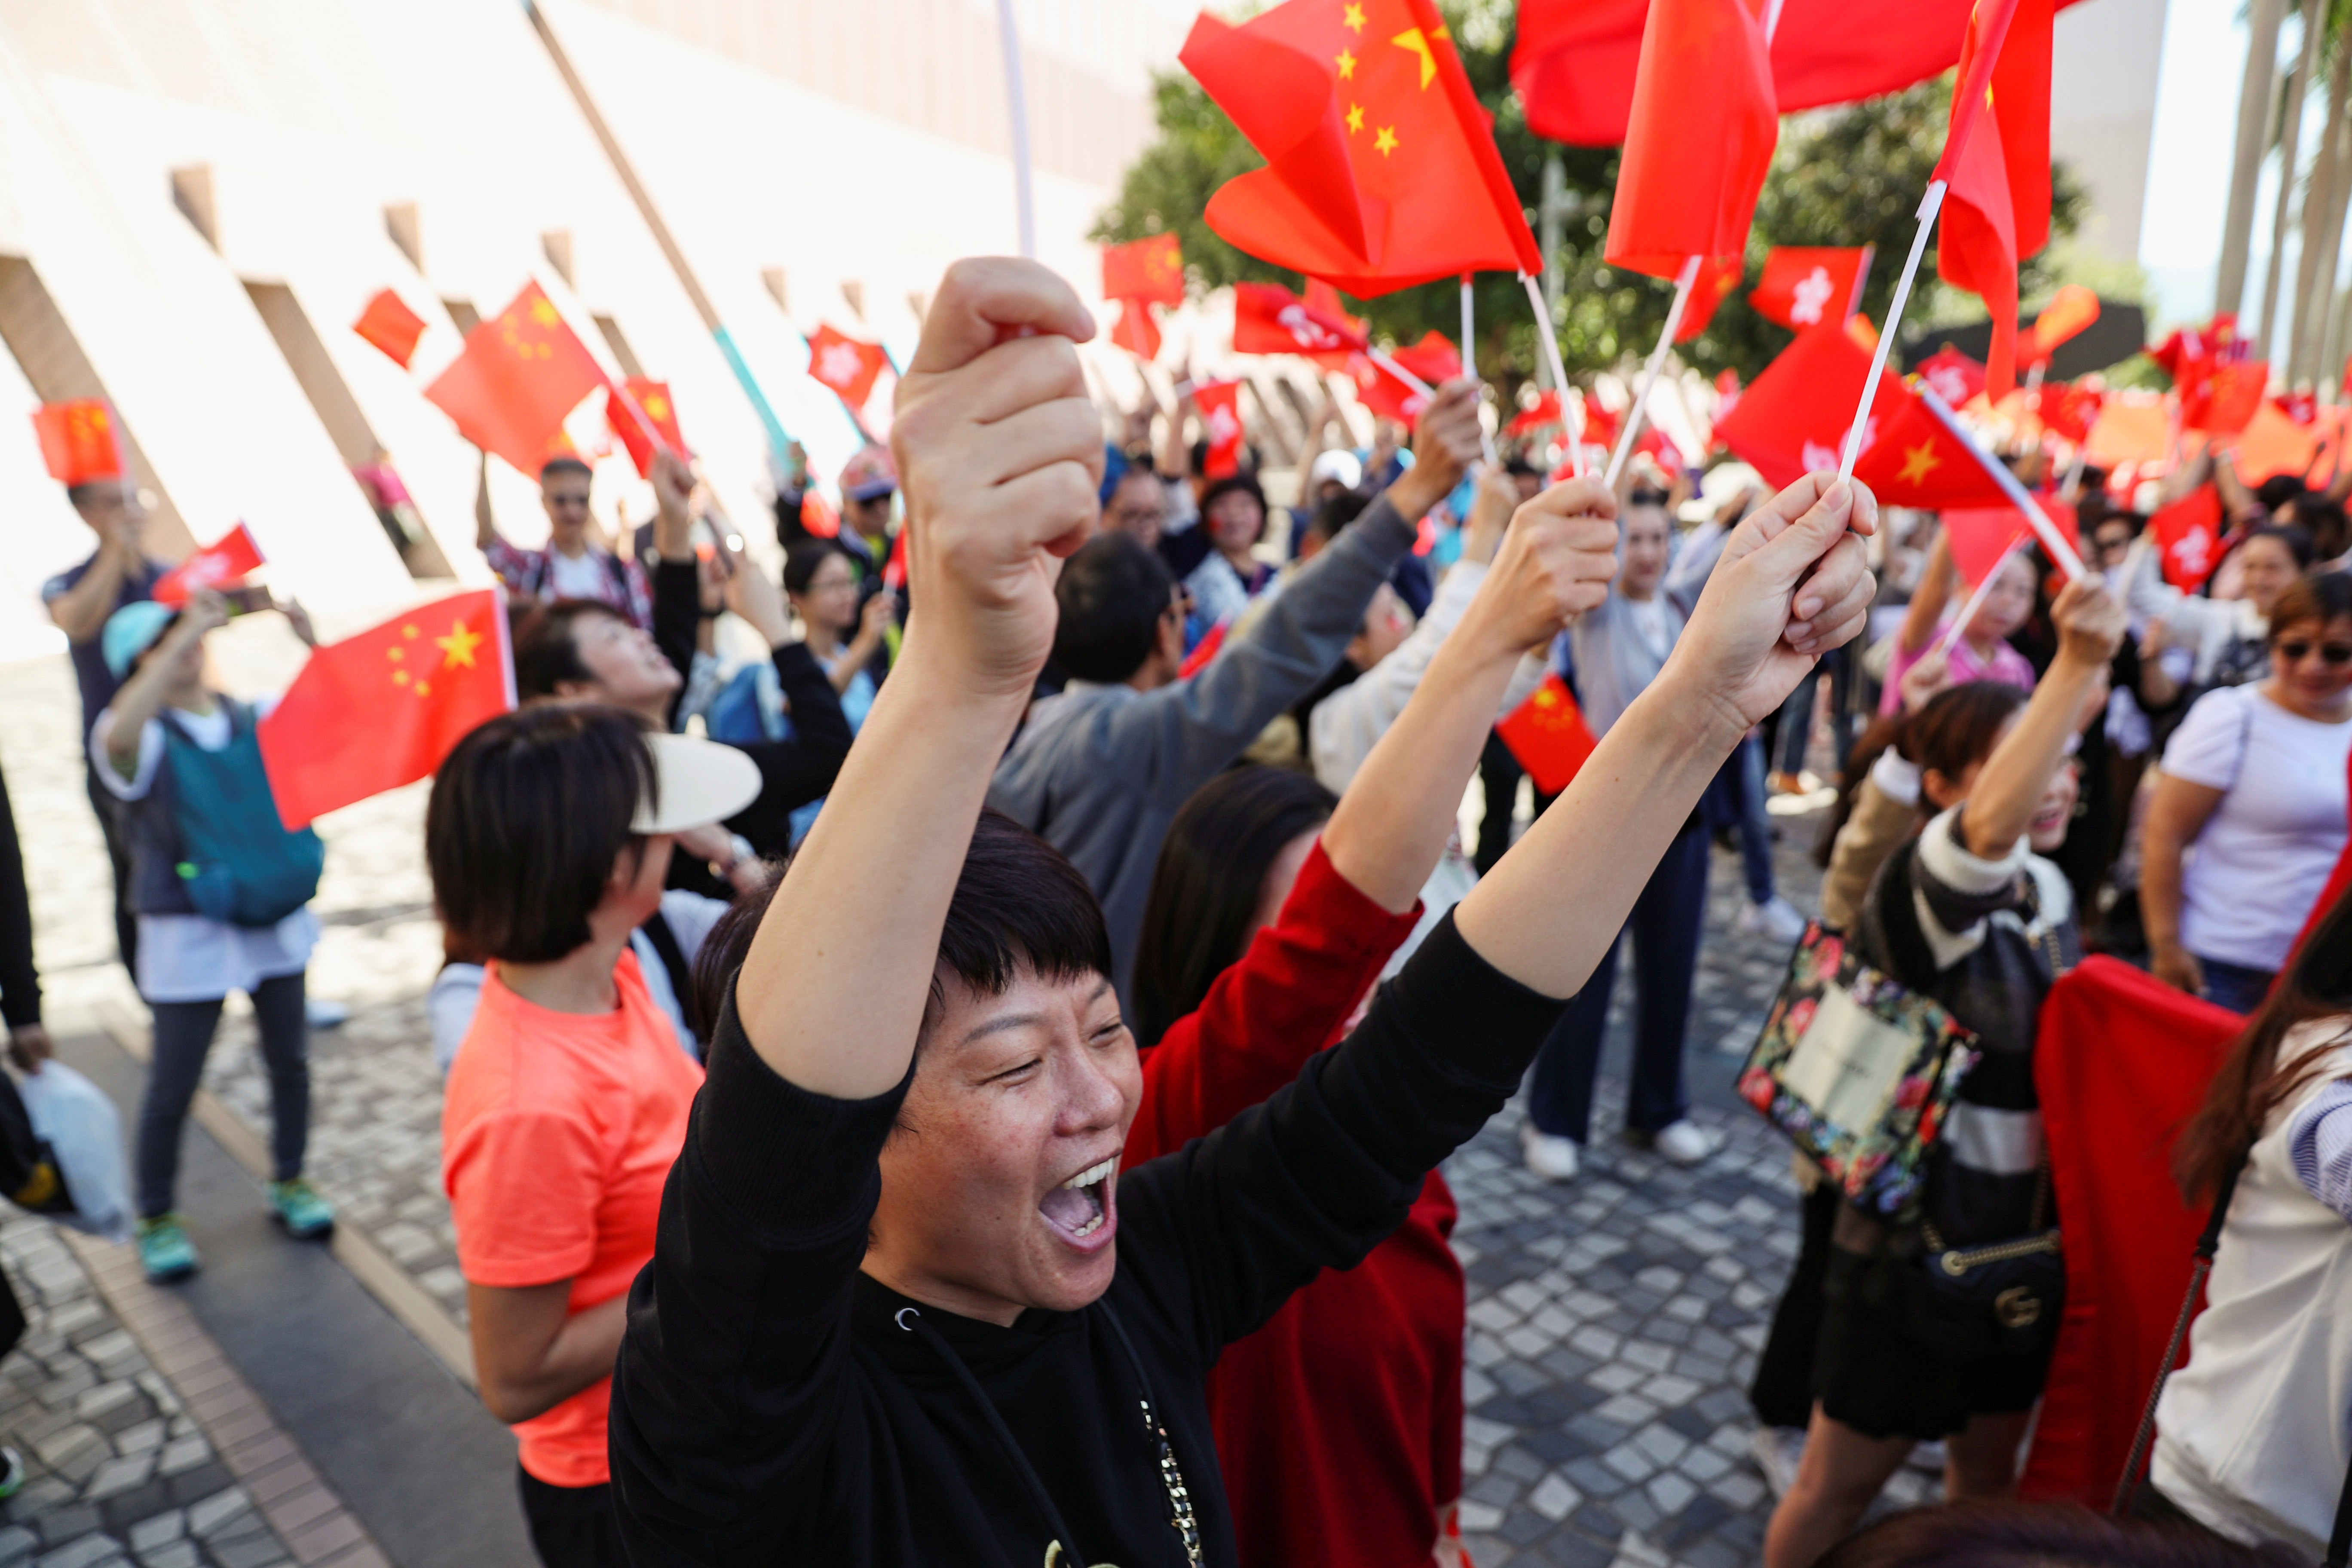 Pro-Beijing supporters sing and wave Chinese flags at a rally underneath the Tsim Sha Tsui clock tower in Hong Kong on December 1. Photo: Reuters